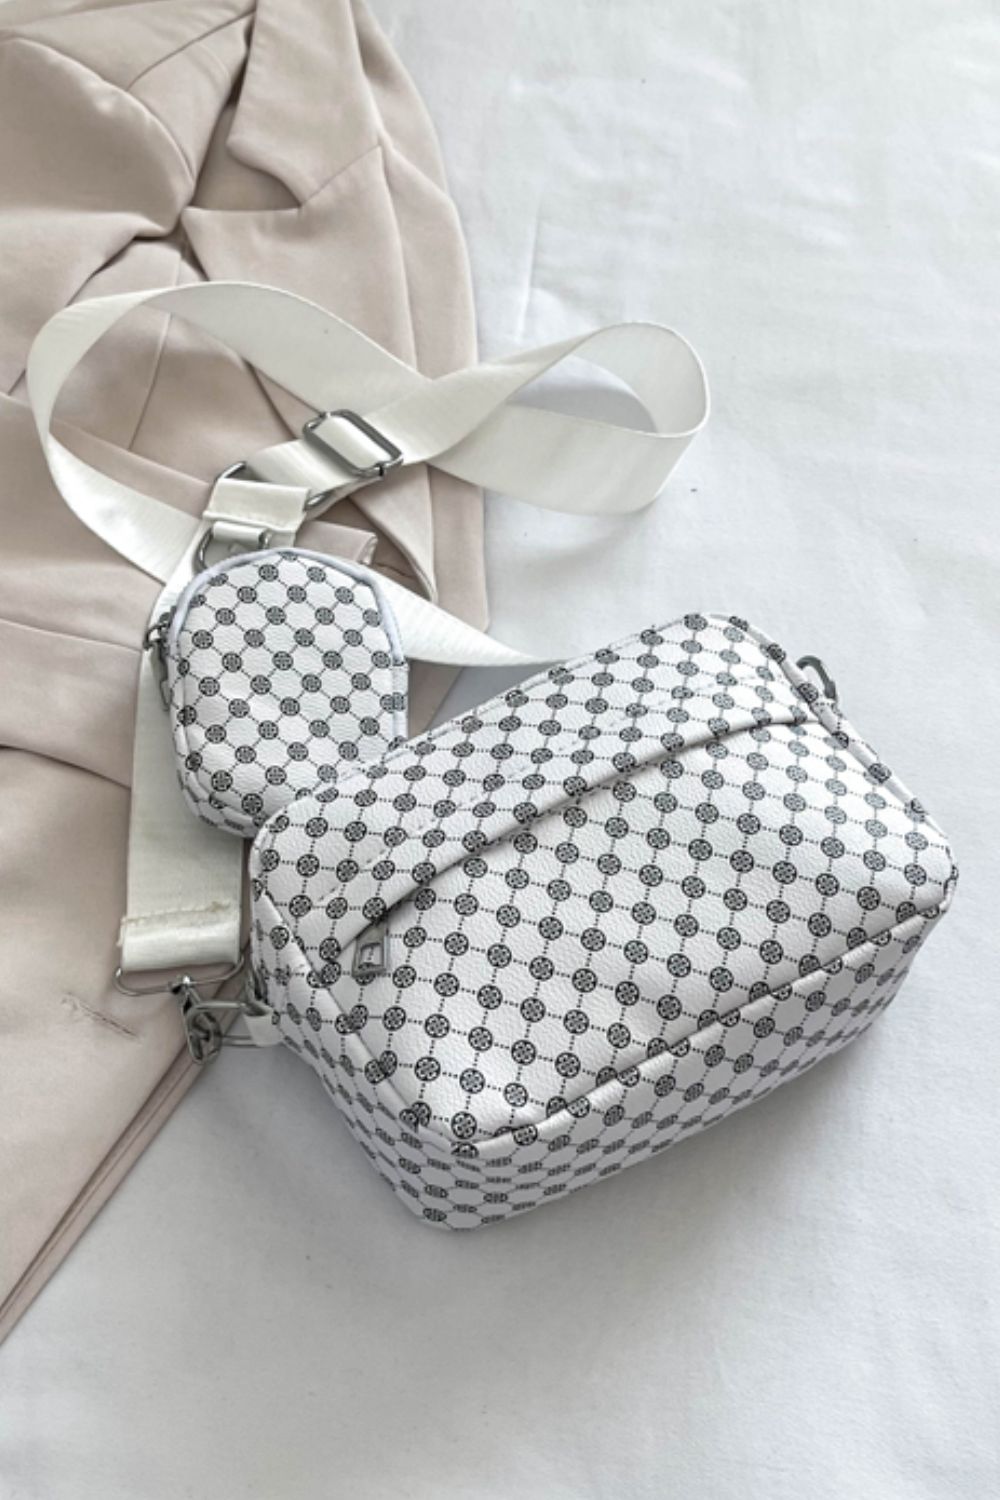 geometric pu leather shoulder handbag with small purse, white, rear view, on bed